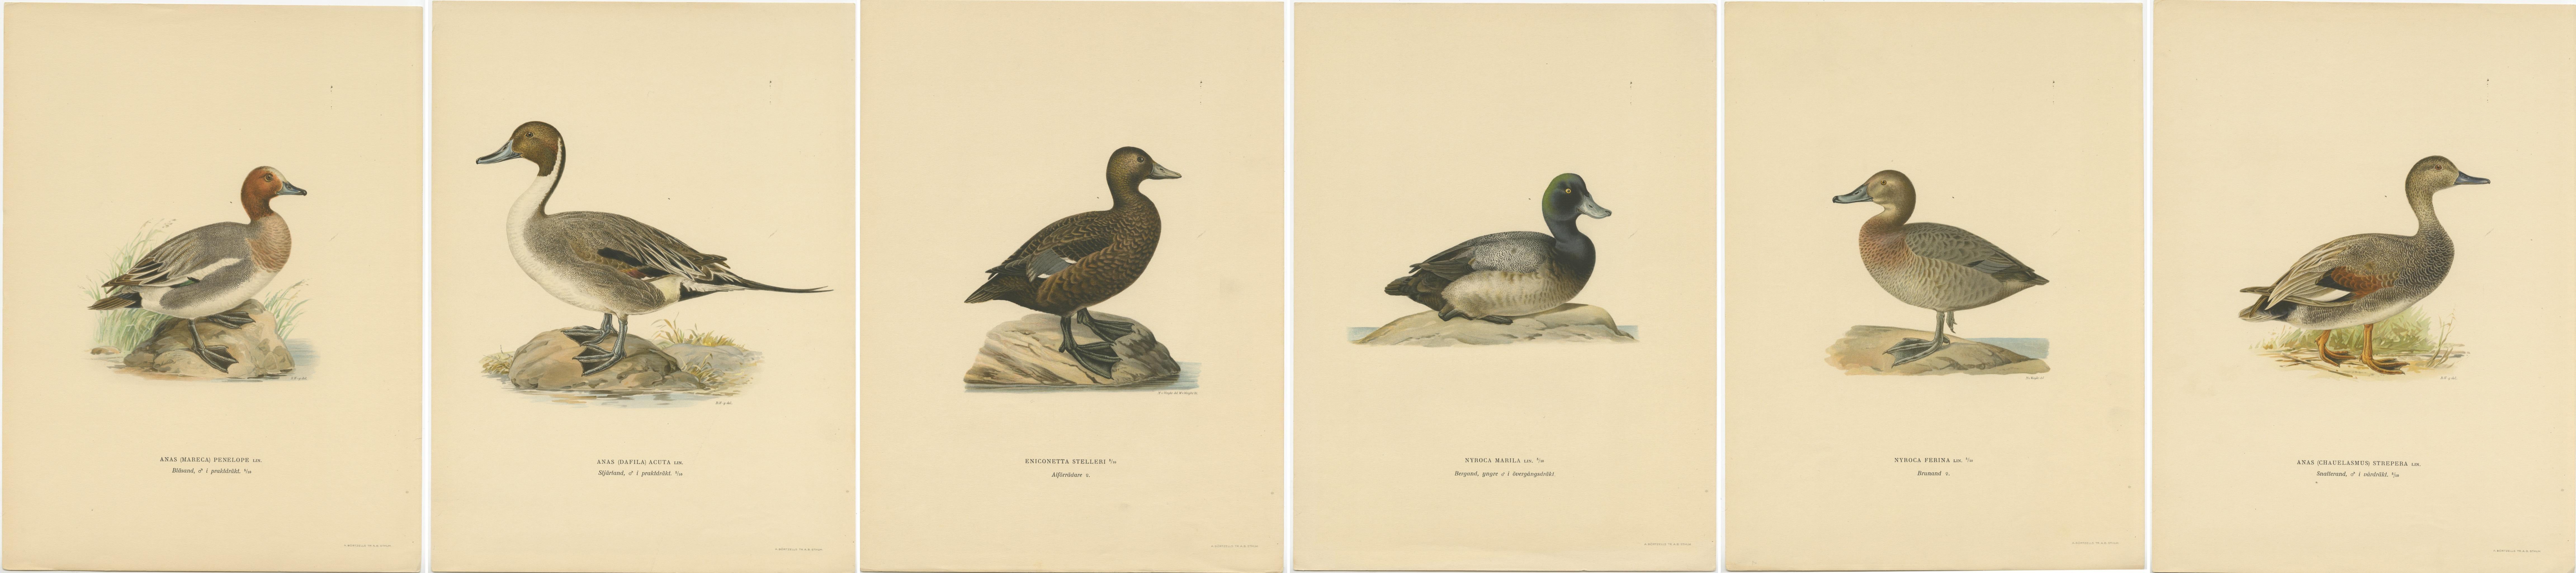 The vintage duck prints from the second edition of 